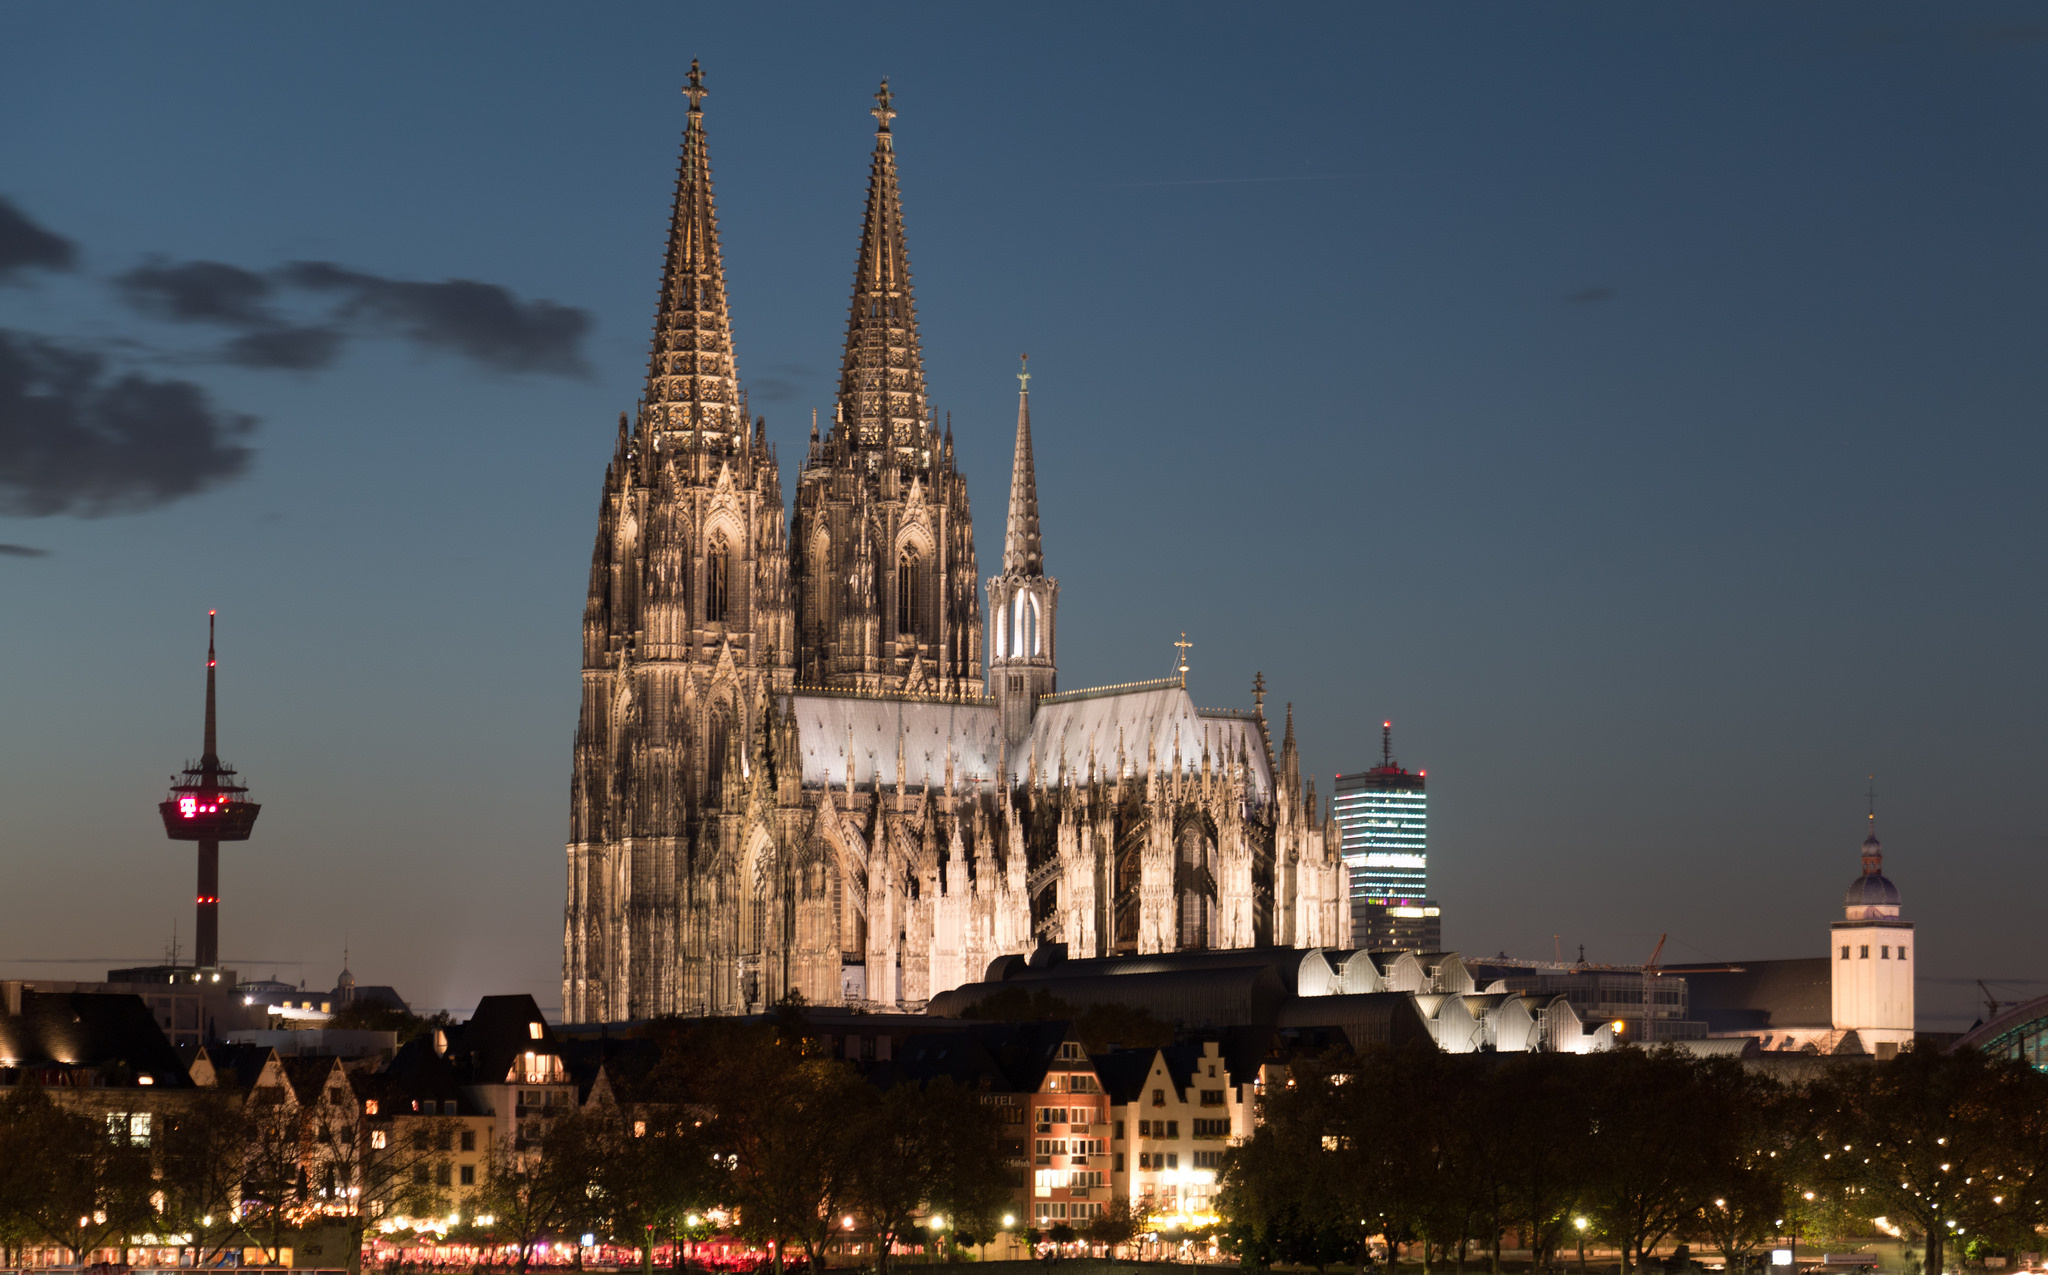 Religious Cologne Cathedral, Latest HD wallpapers, Architectural images, Faith and travel, 2050x1280 HD Desktop